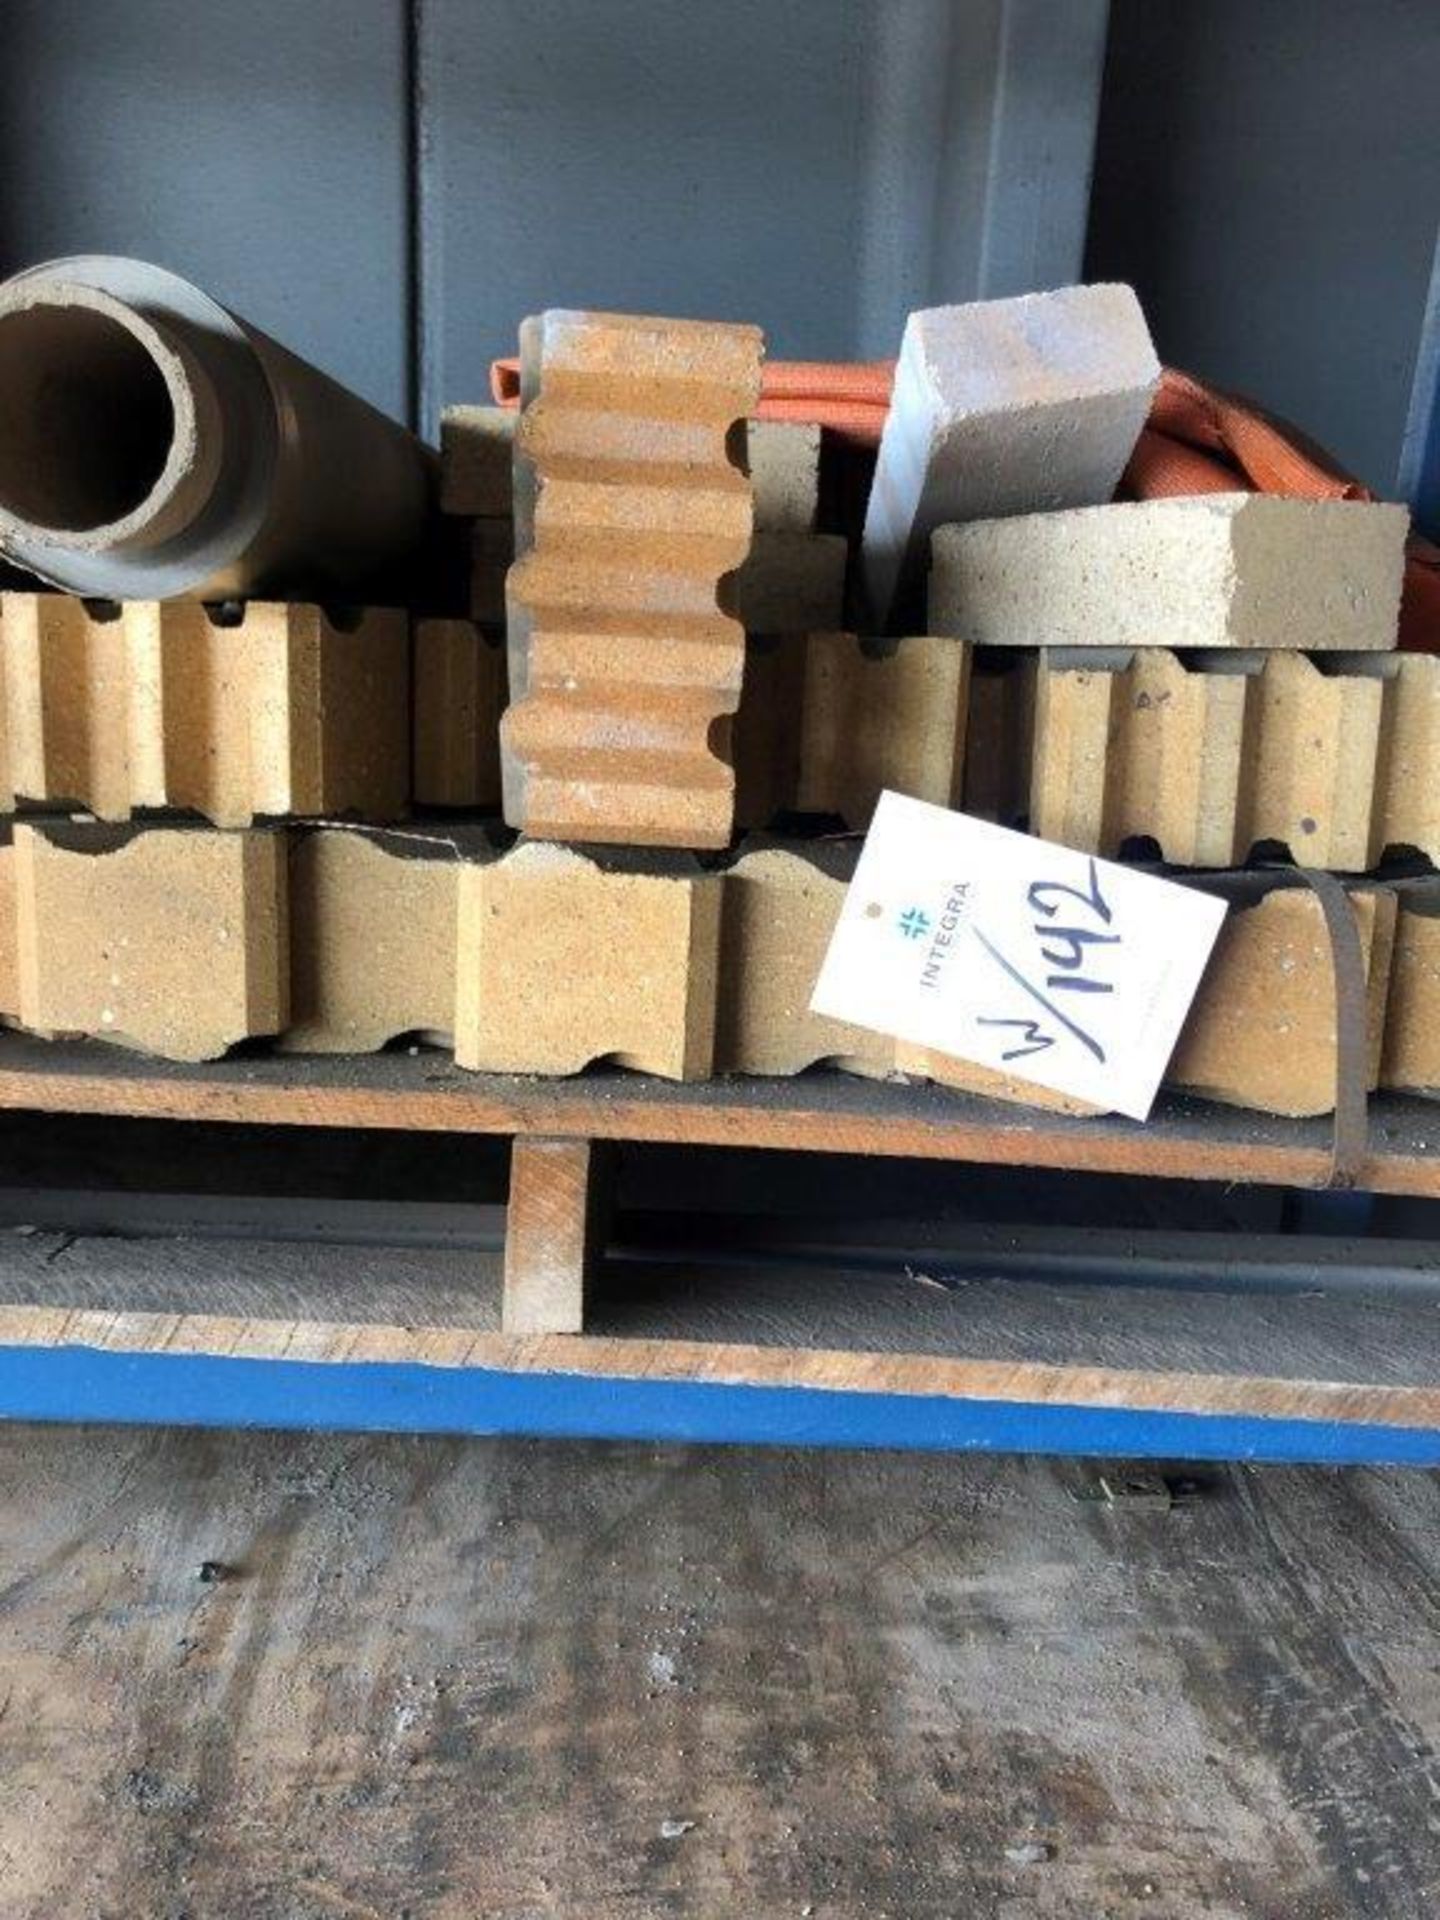 Miscellaneous Refractory Material, (7) Pallets, Insulation Board, Thermafiber, Plibrico, Plicast, - Image 8 of 8